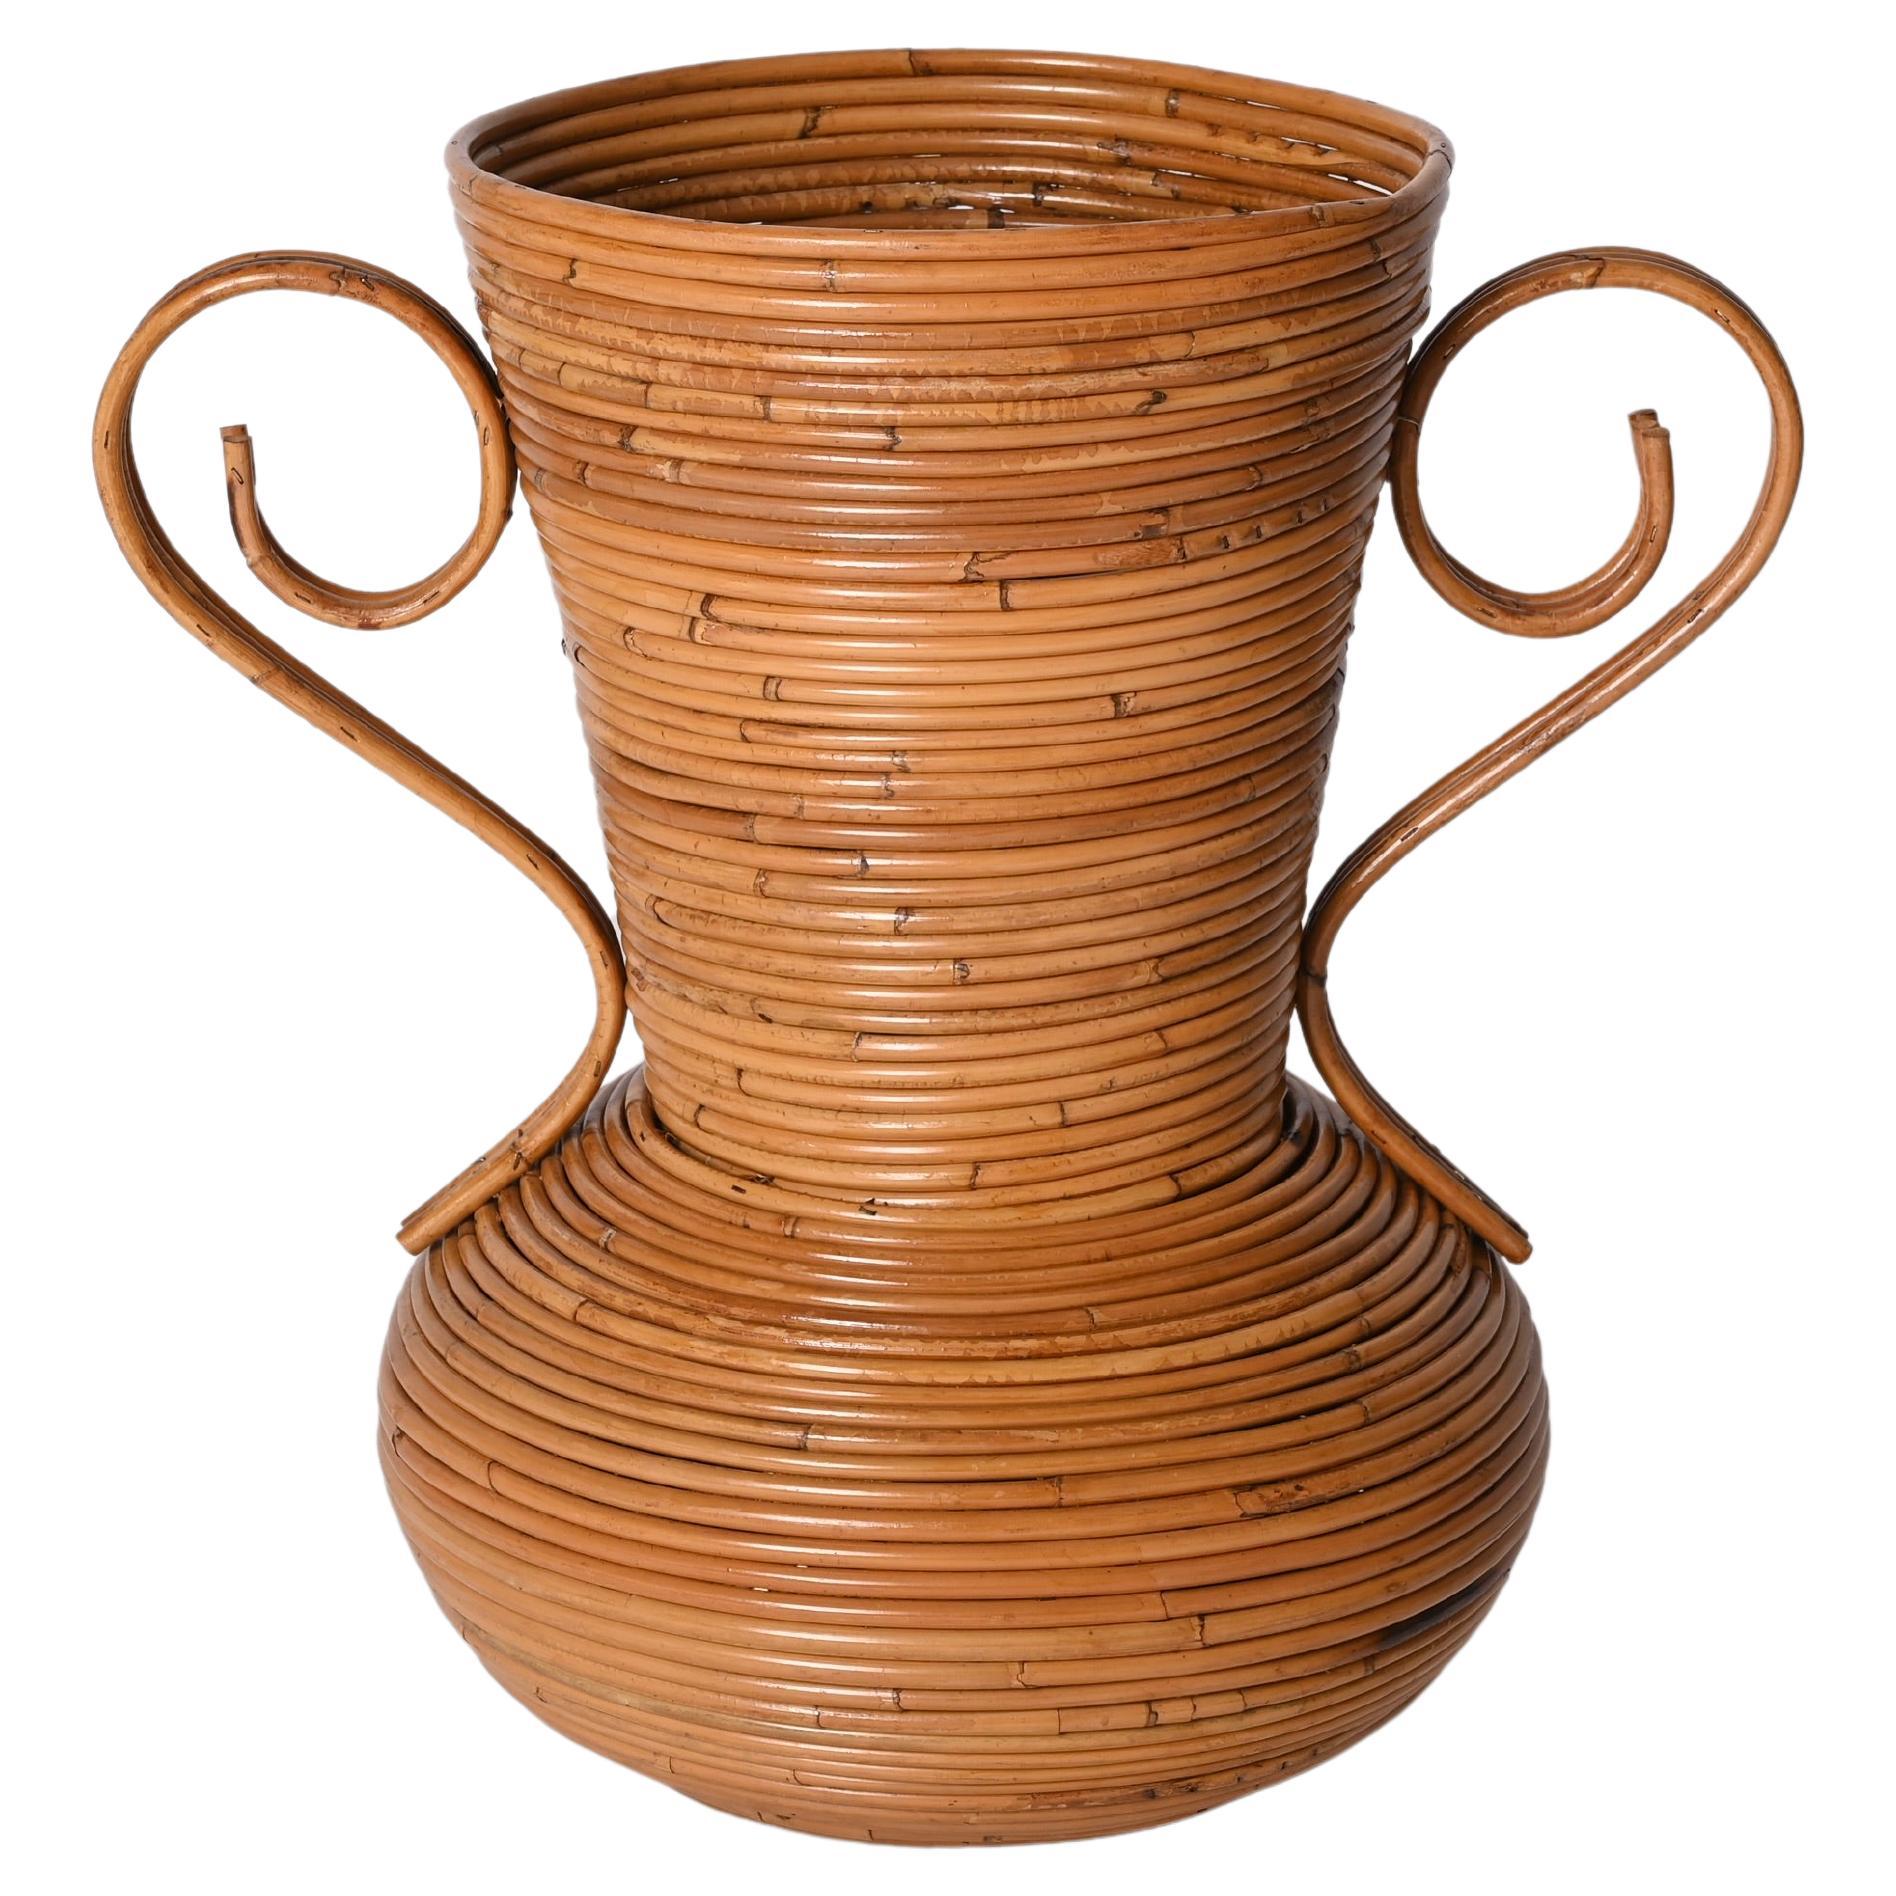 Midcentury Bamboo and Rattan Decorative Vase, by Vivai del Sud, Italy, 1970s